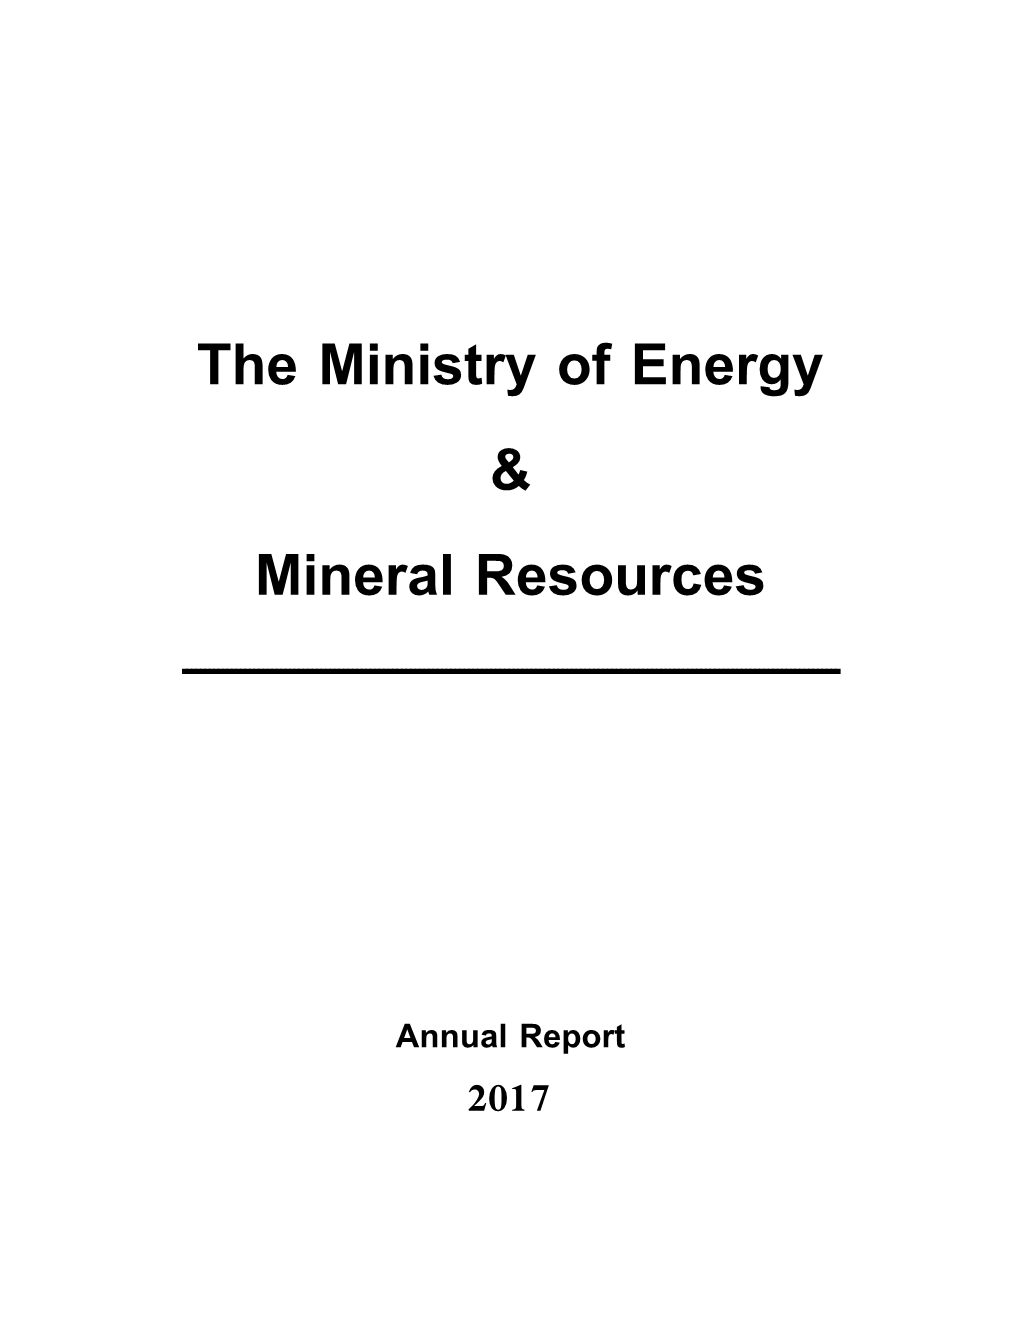 The Ministry of Energy & Mineral Resources